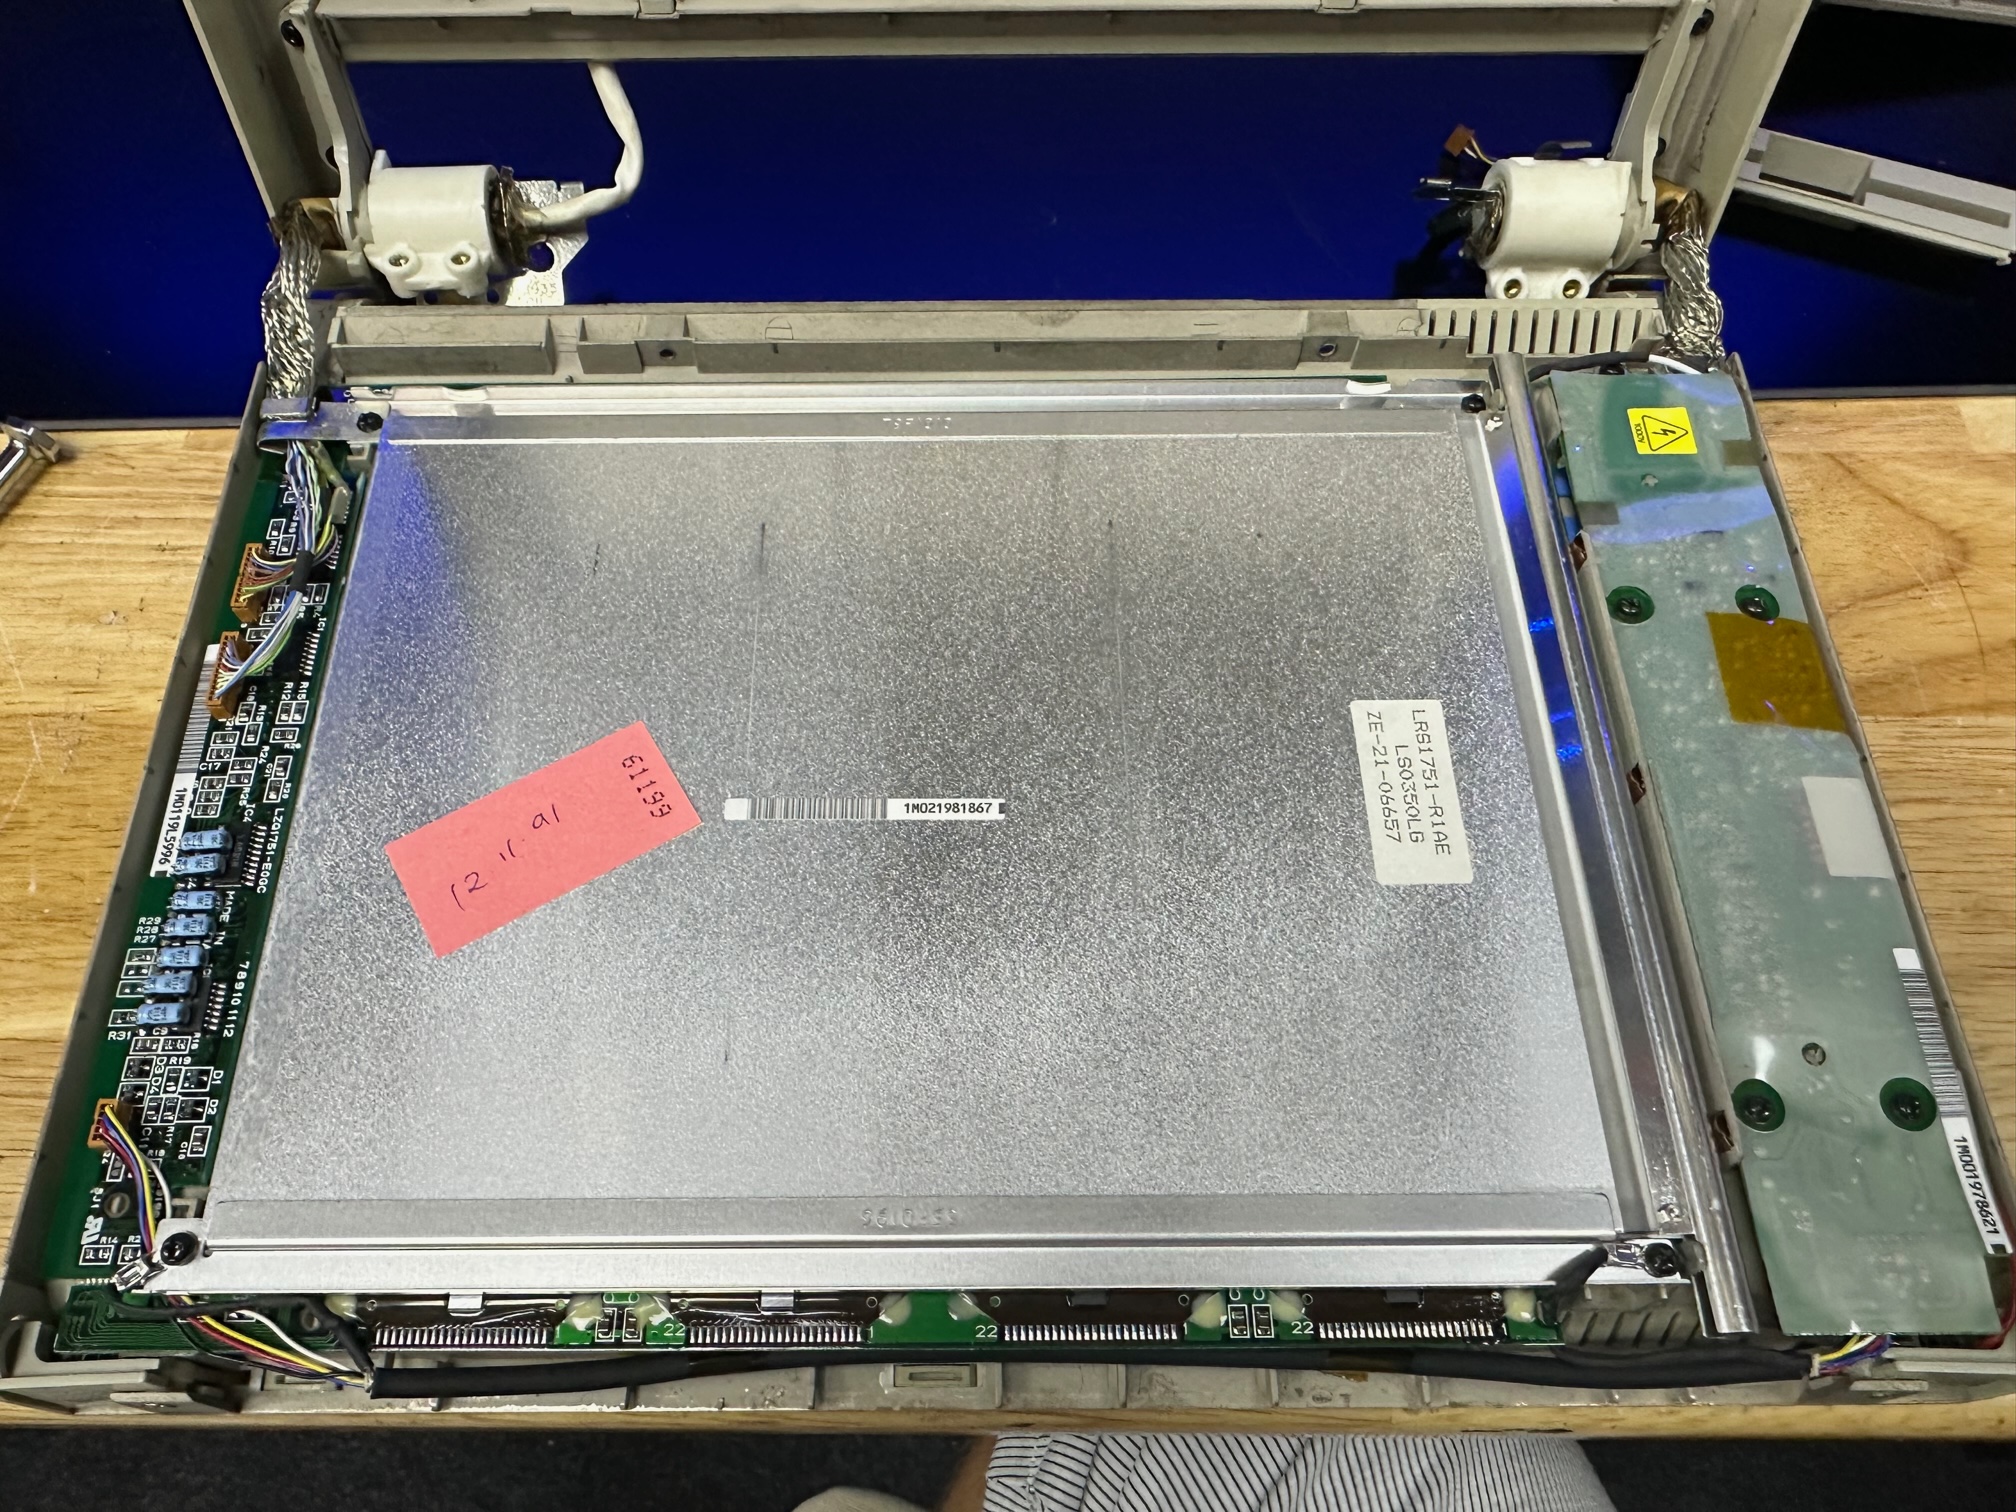 Inside the L40 SX LCD section